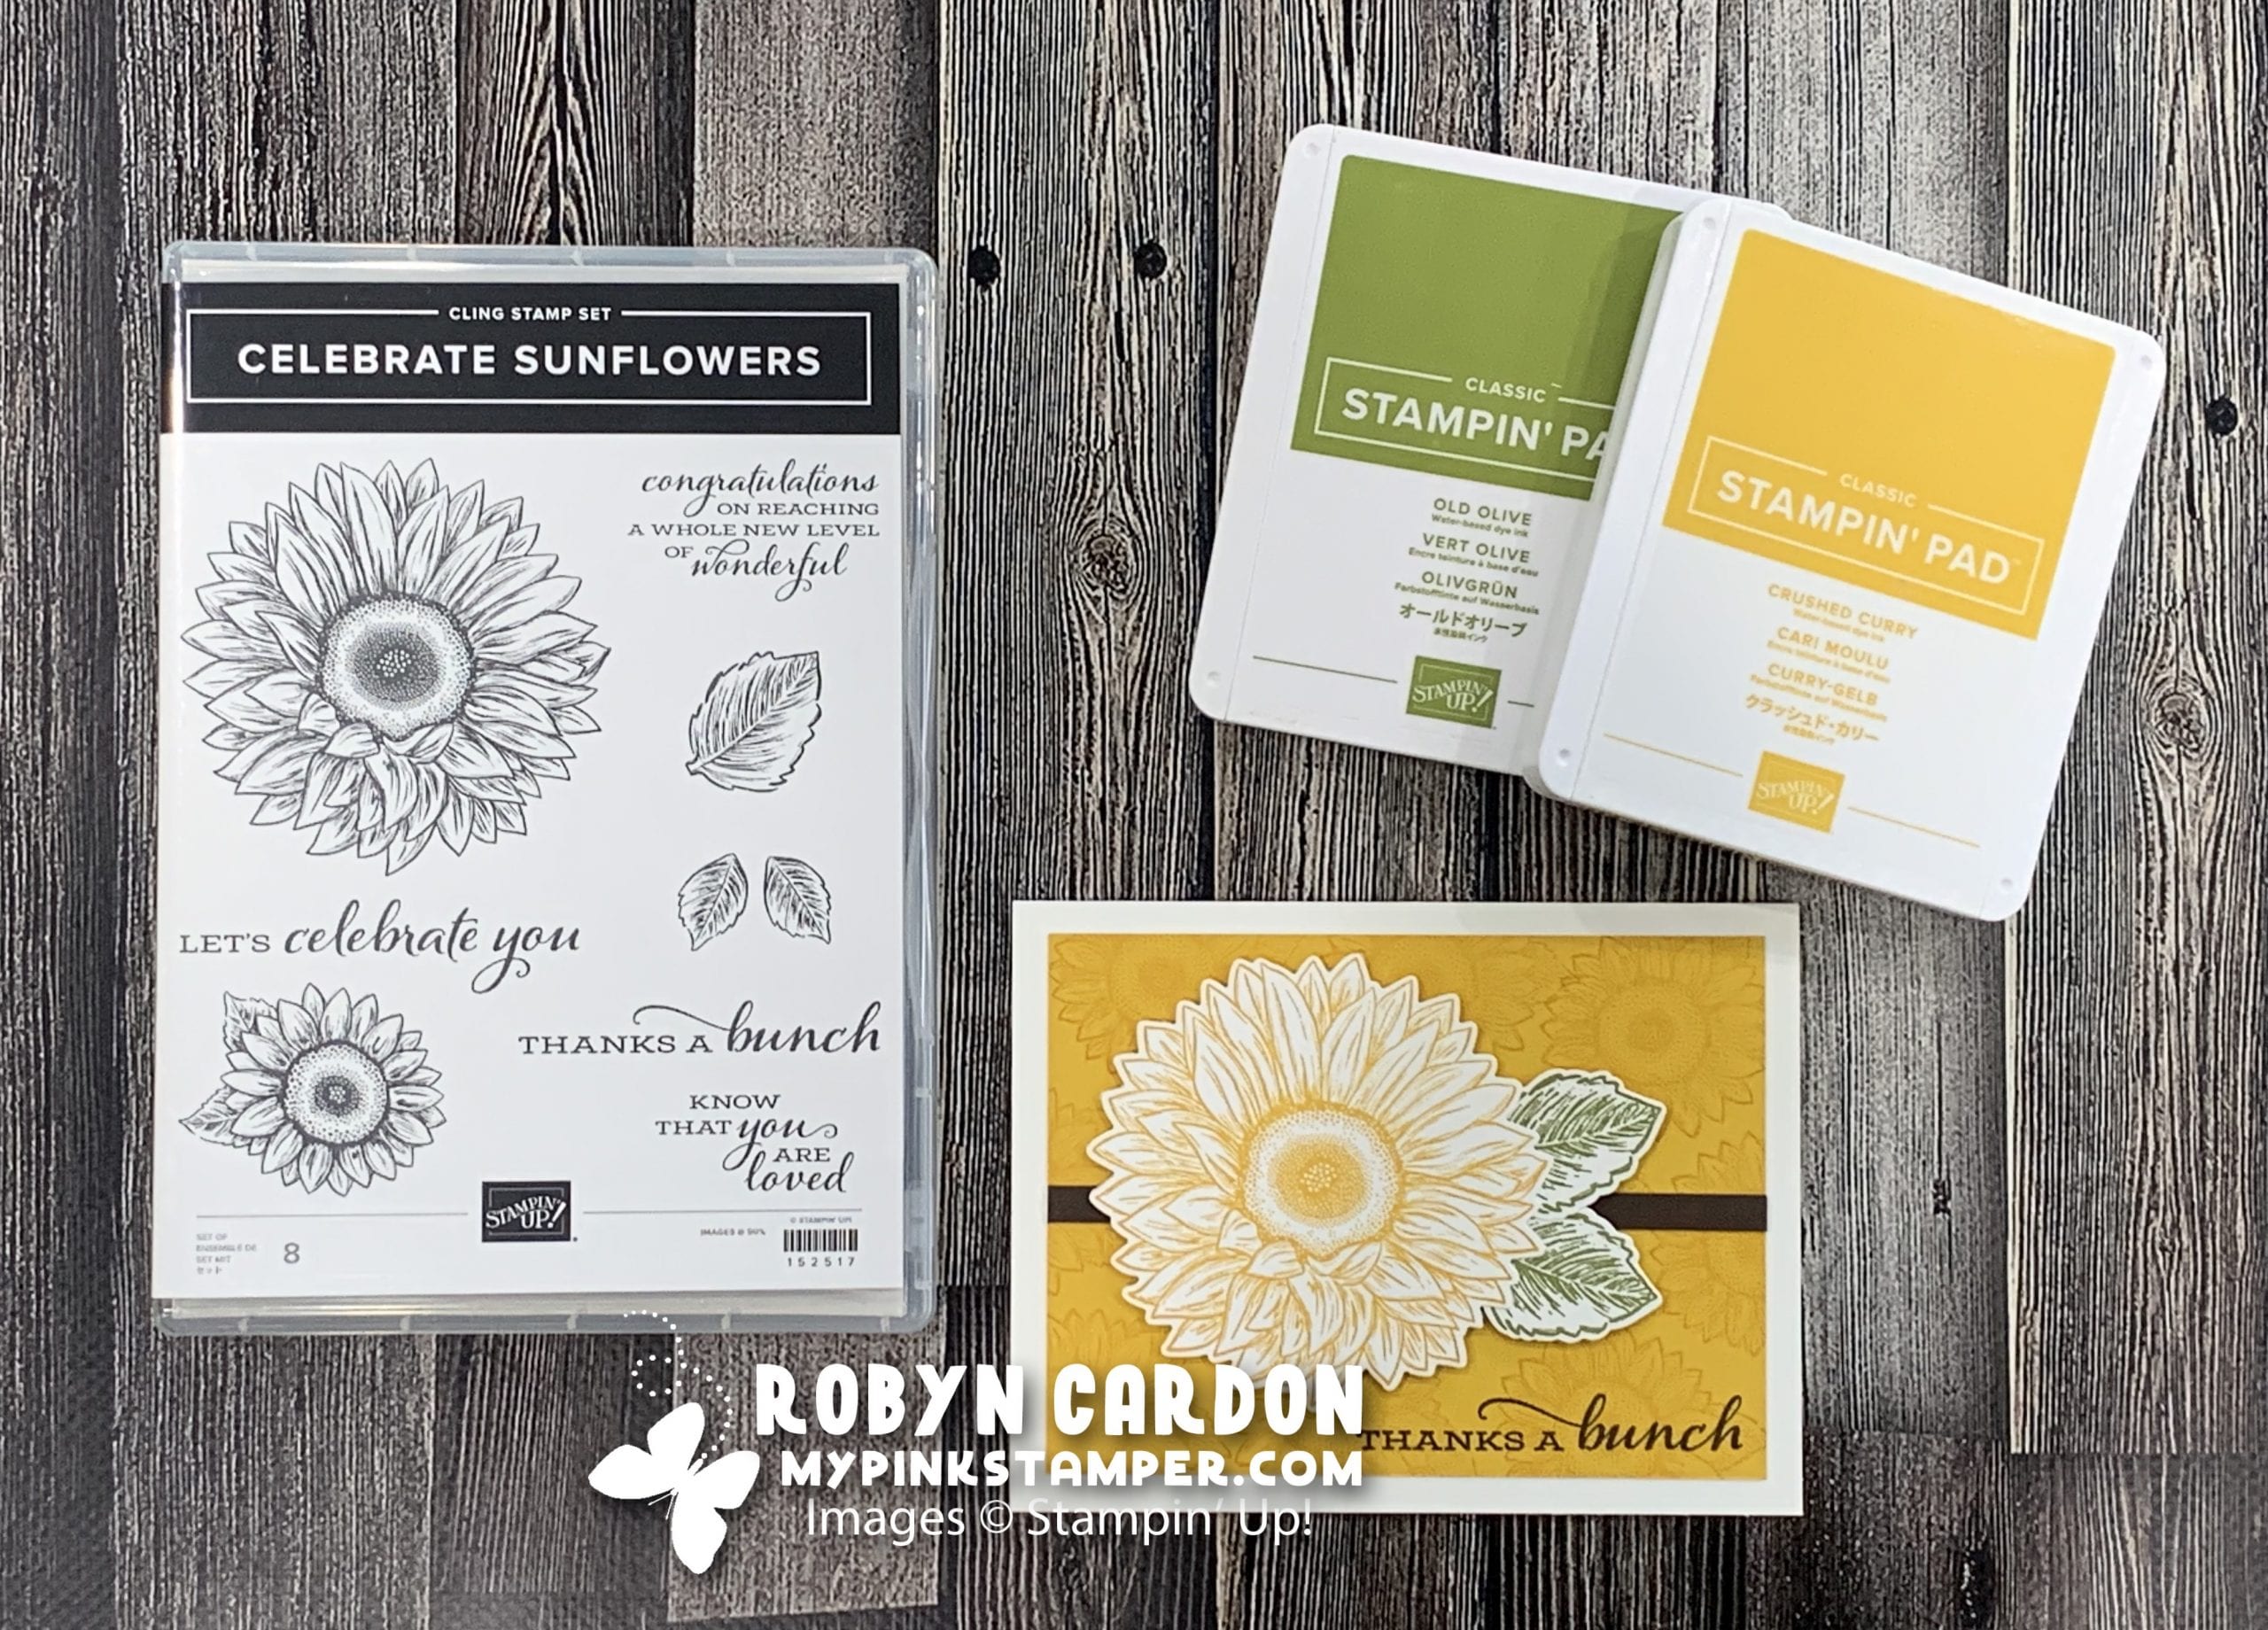 Days 21-23 – A Card a Day in May – THREE Giveaways & Week 4 Promotion!